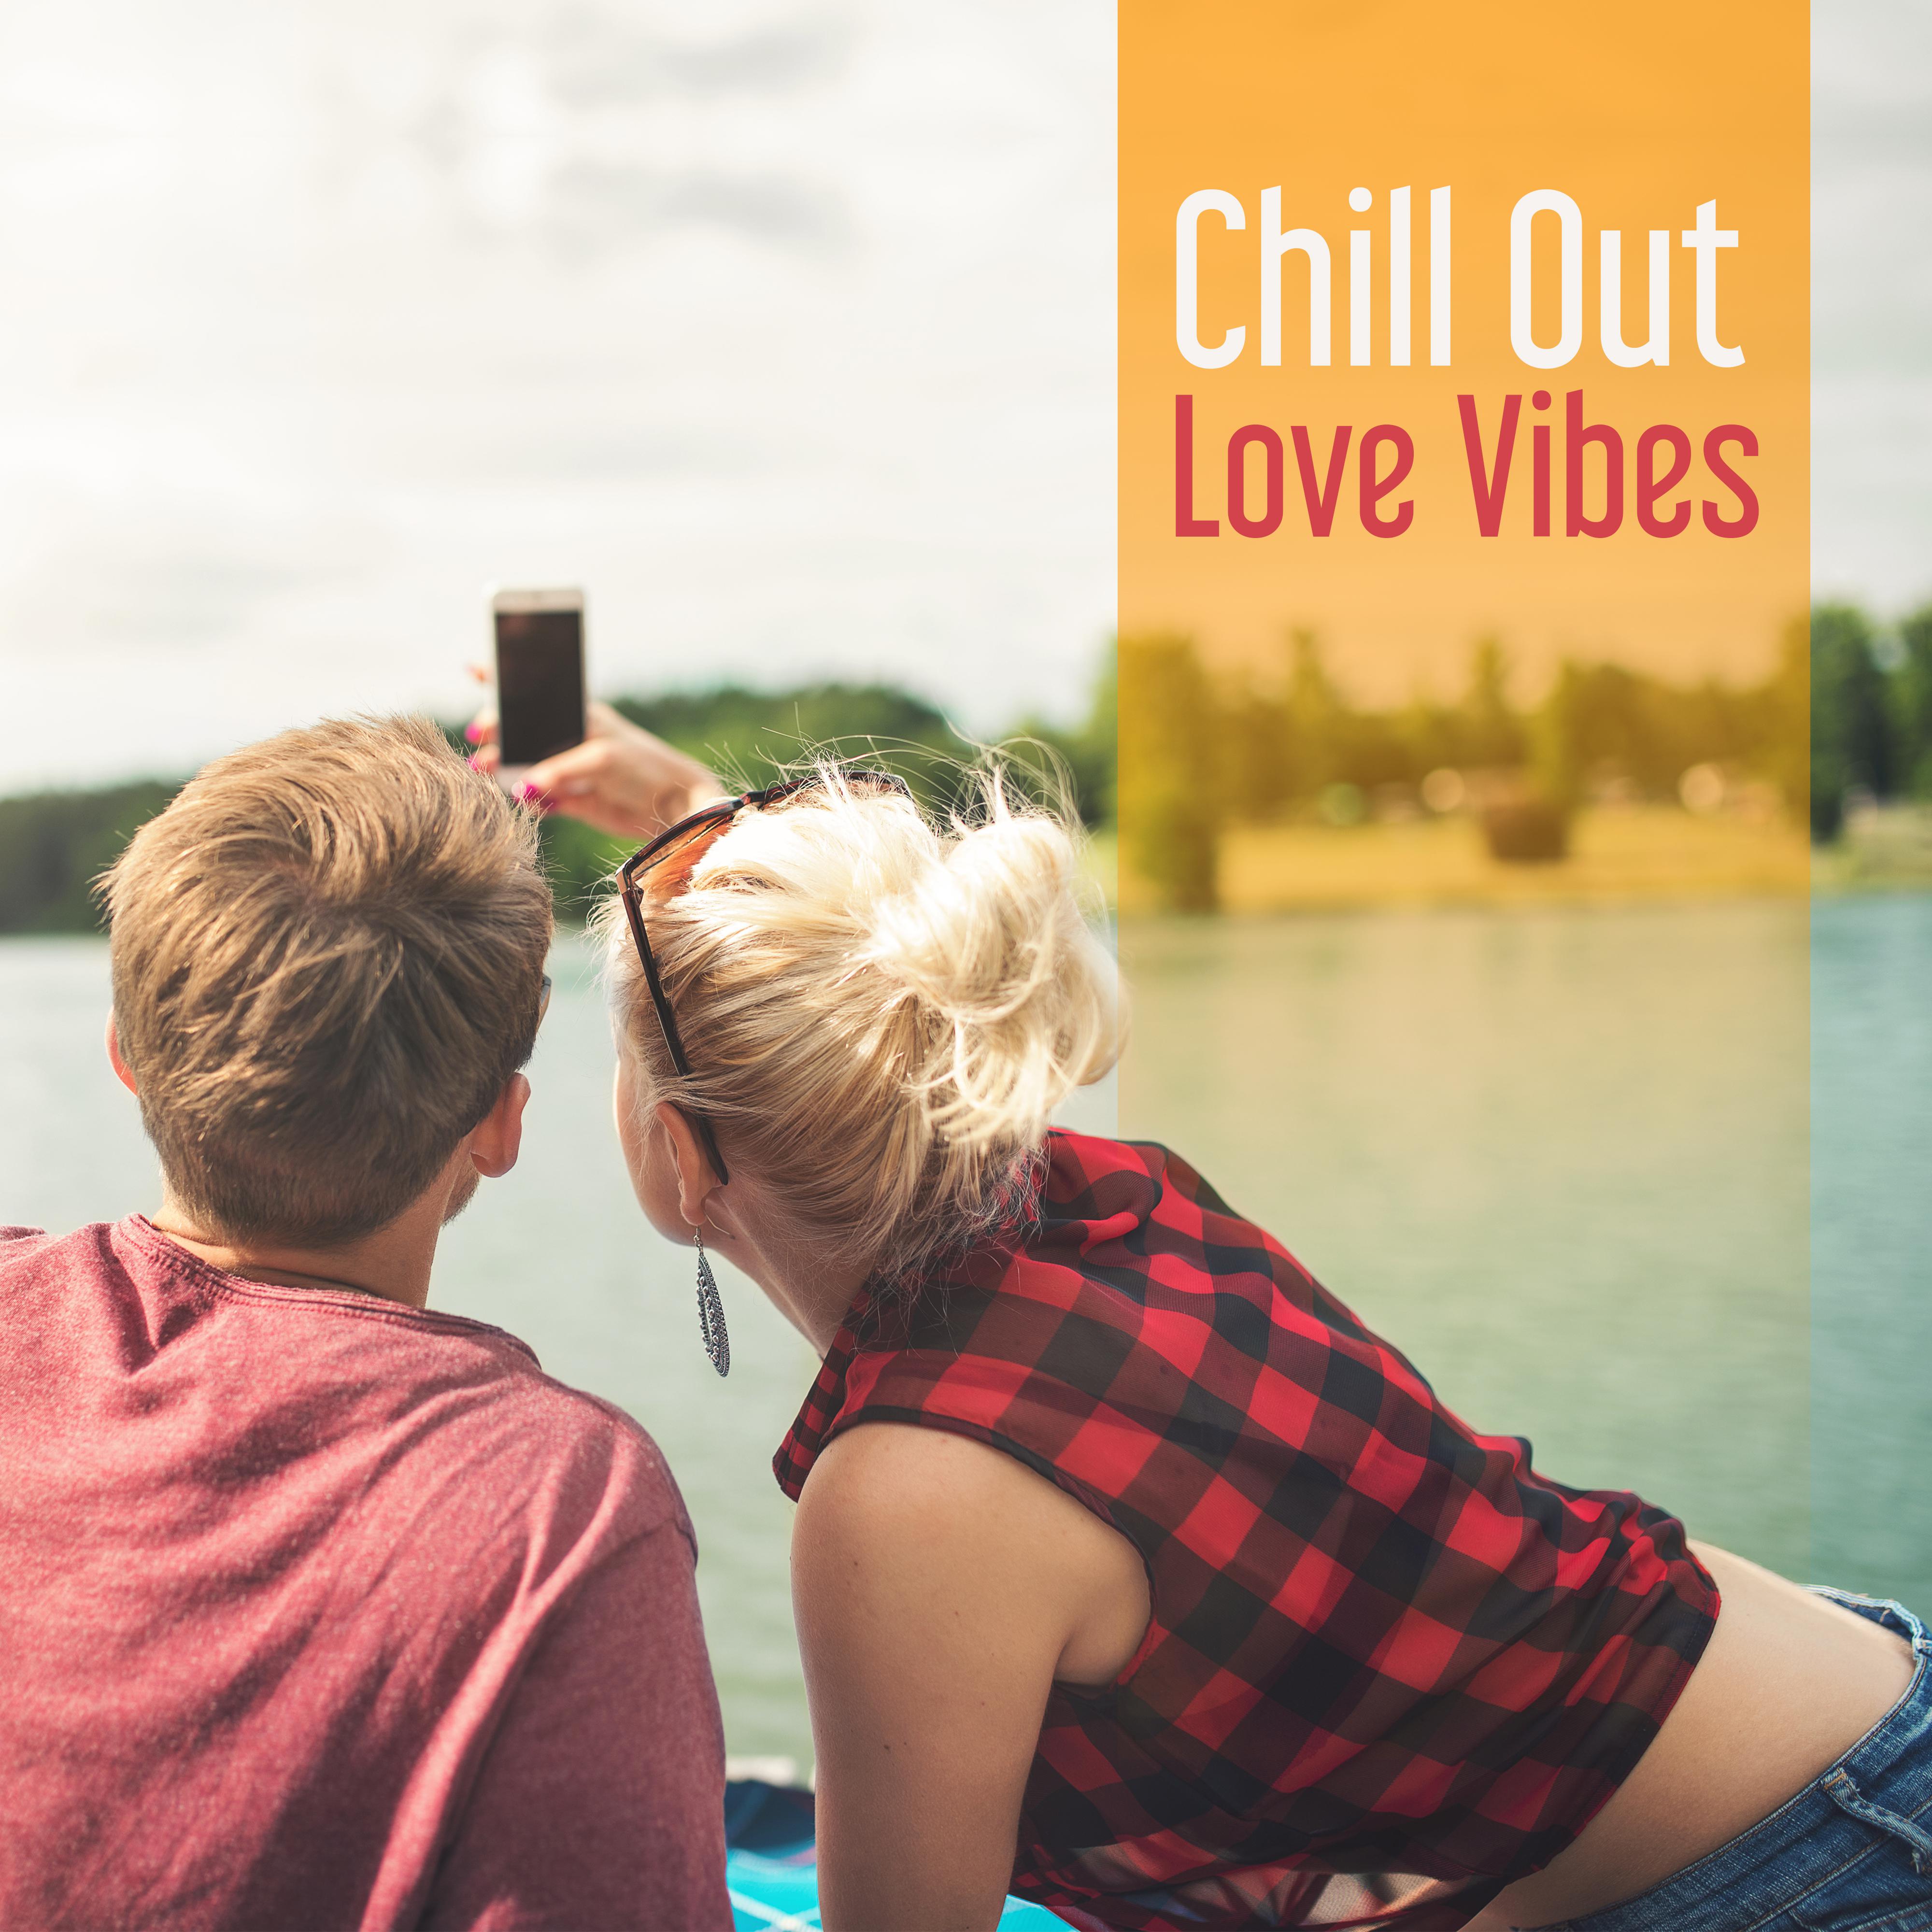 Chill Out Love Vibes – Sexy Dance, Ibiza Party Time, Erotic Beach Music